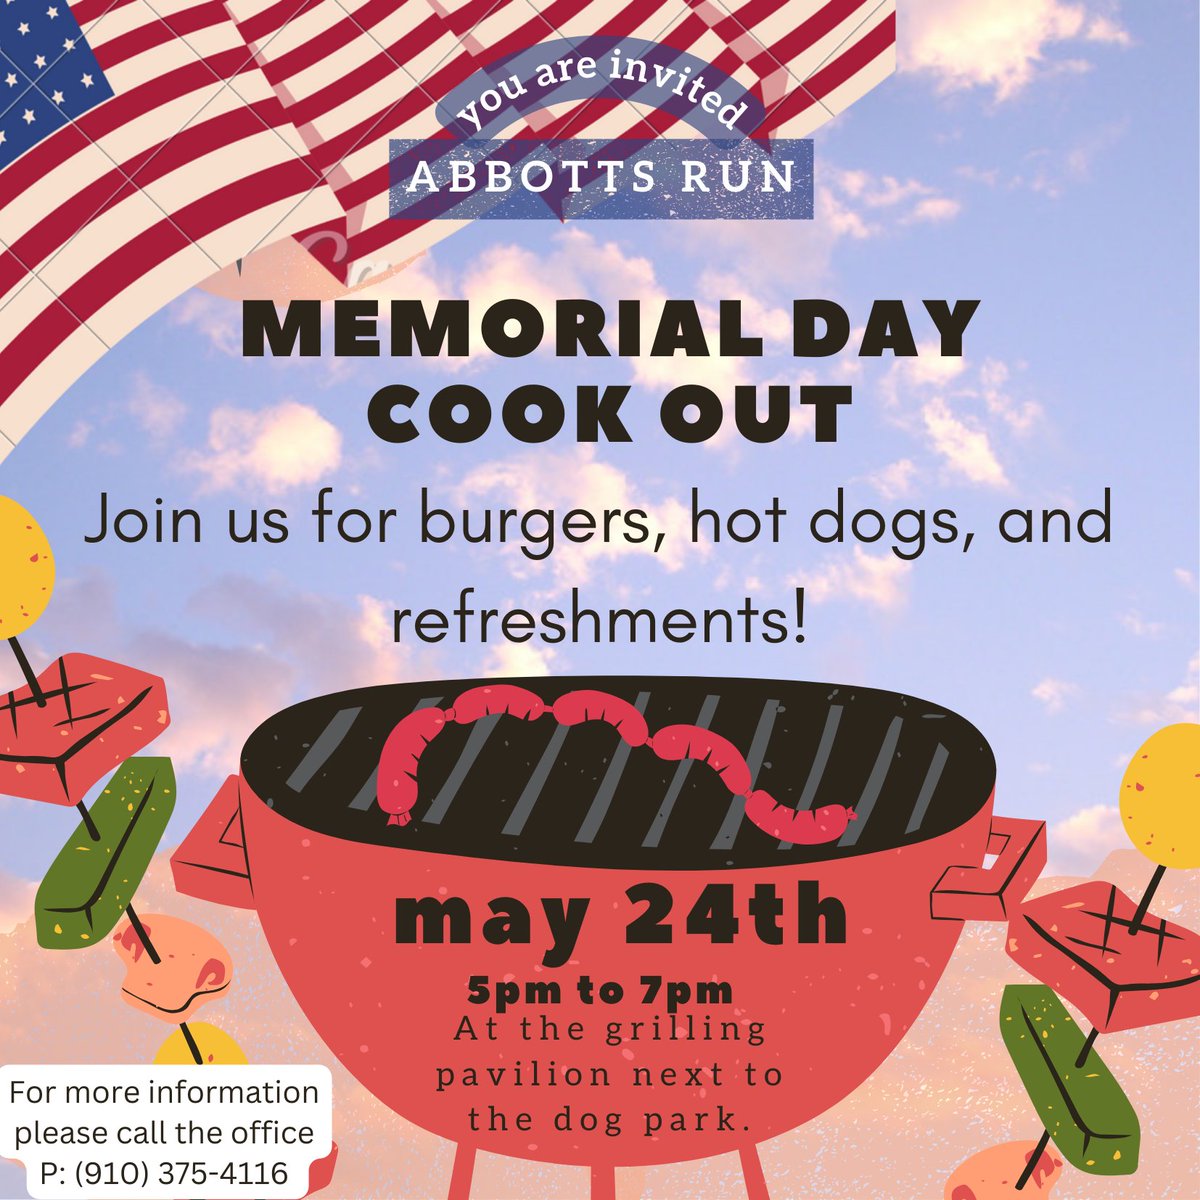 Cookouts are always the best! Just a little token of appreciation for our residents.

#goodfood #goodtimes #weloveourresidents #AbbottsRunApartments #SAMFAM